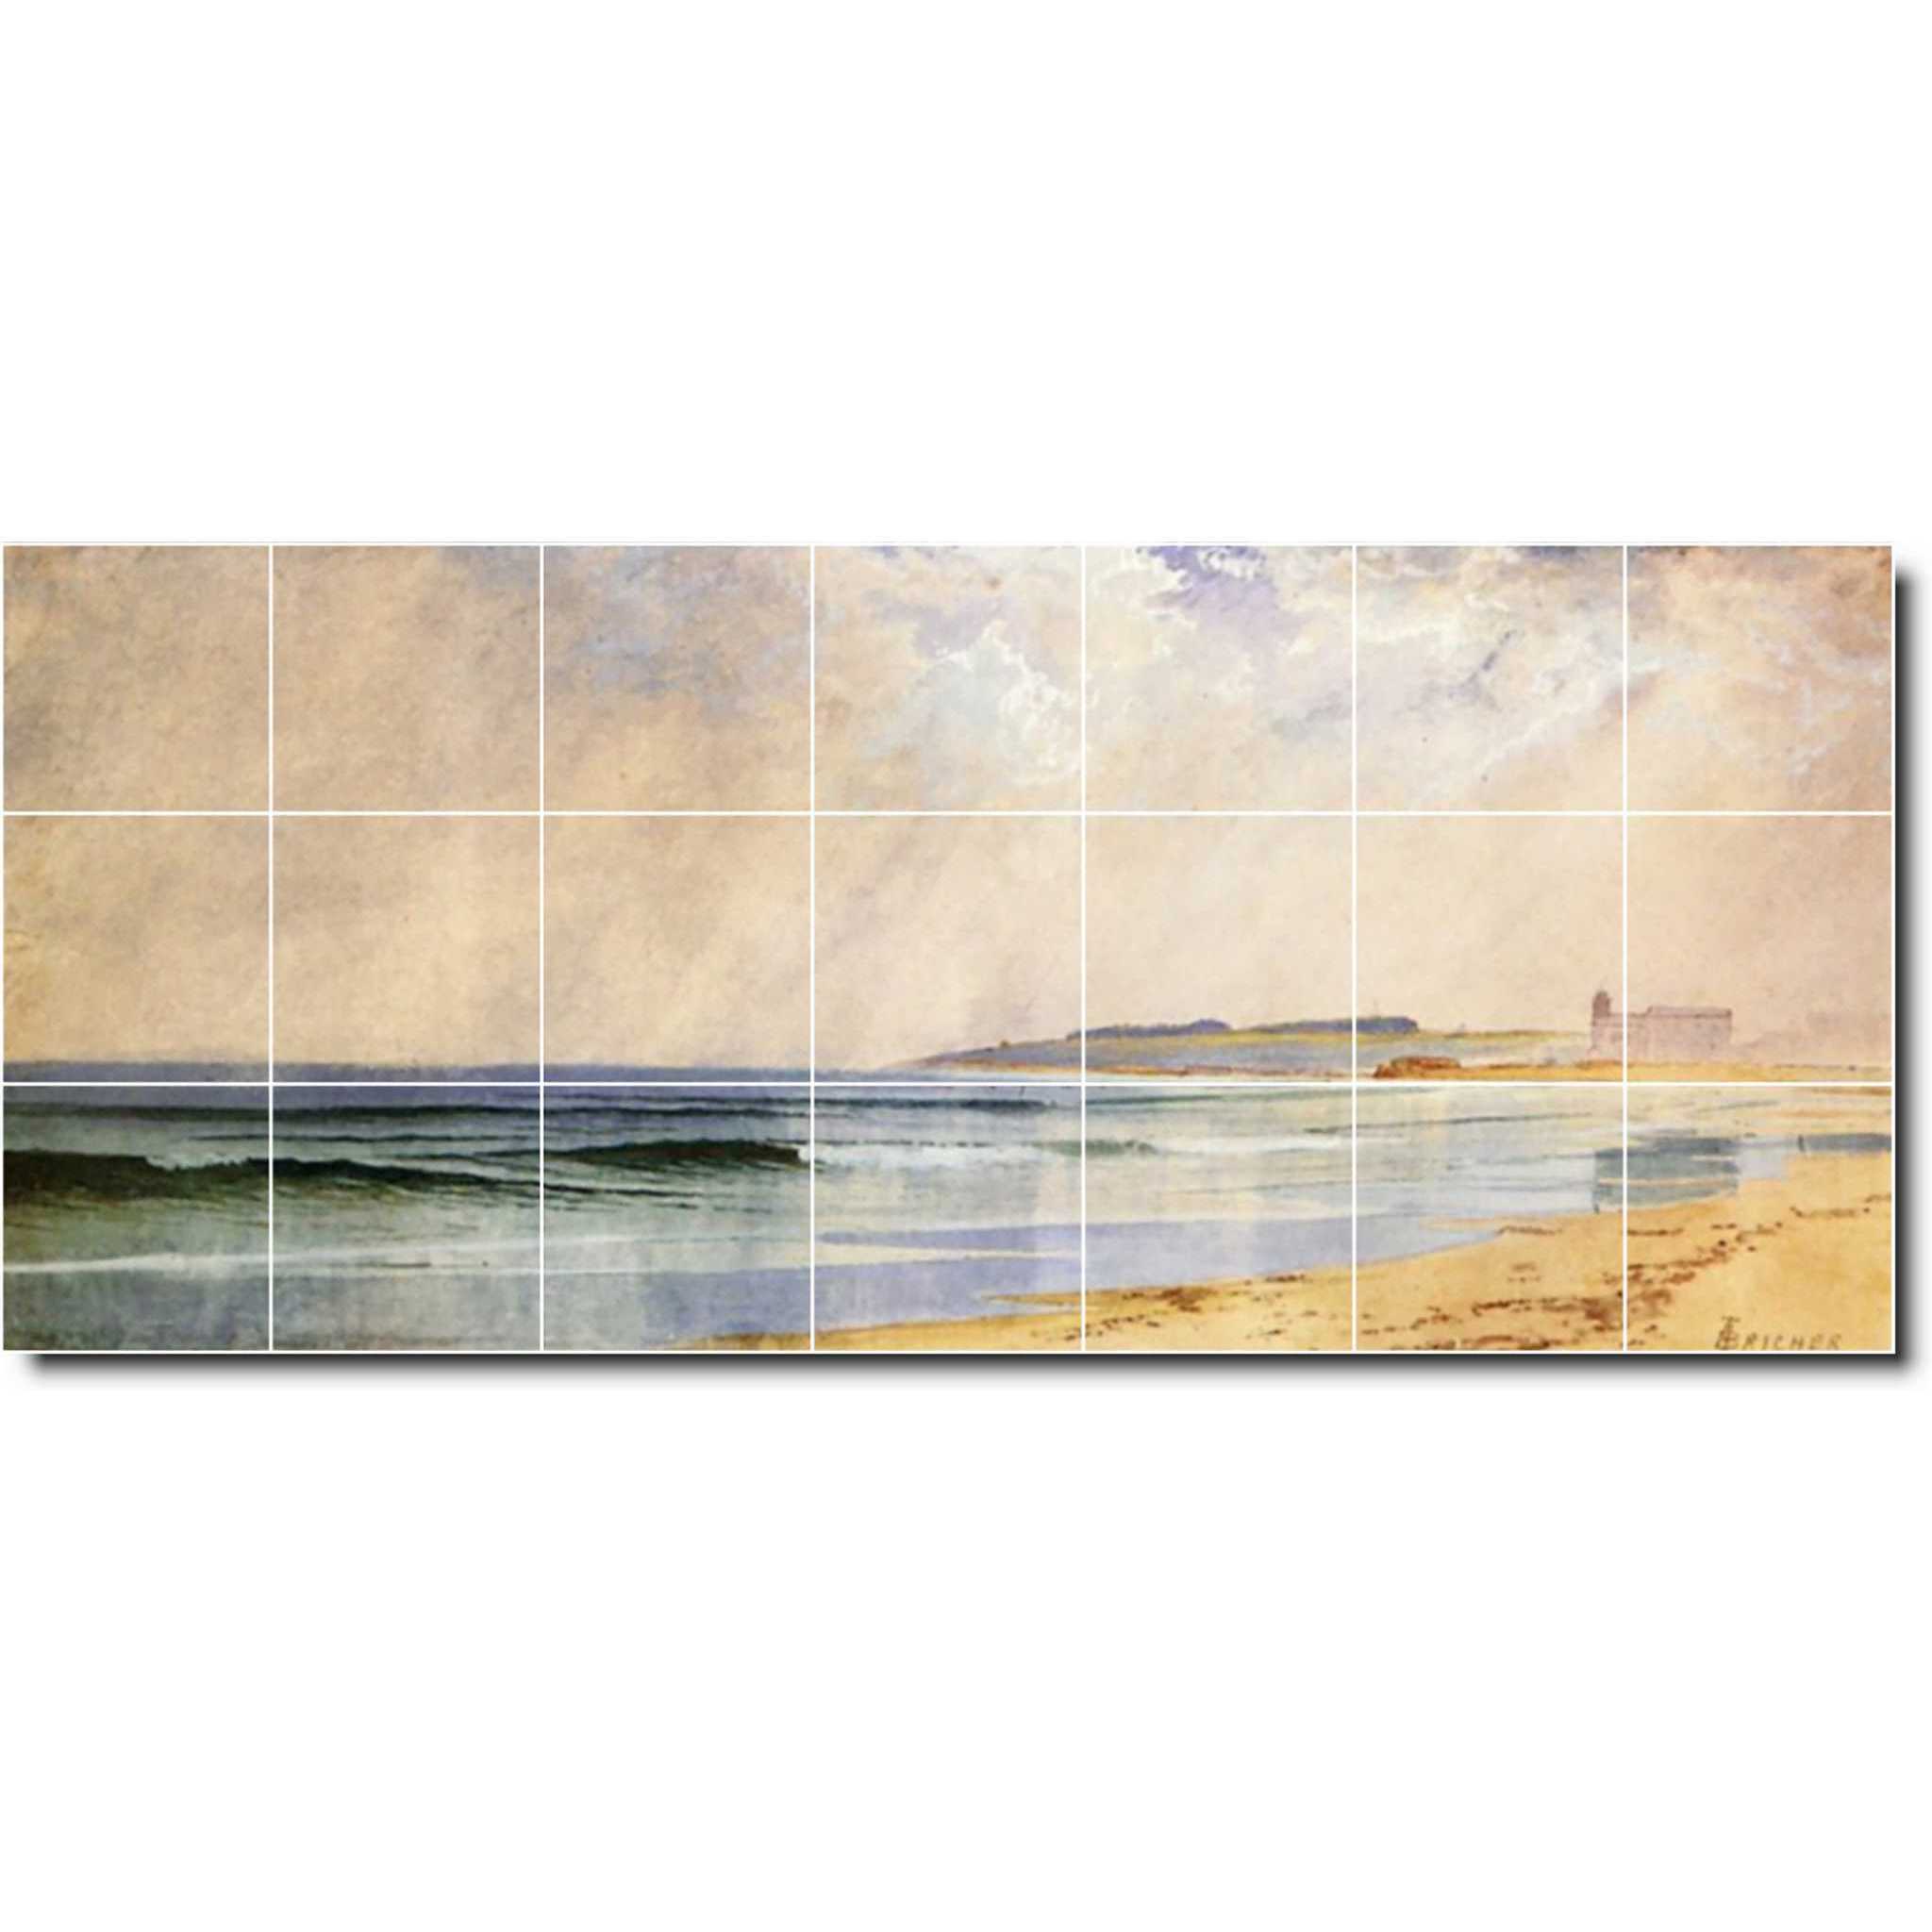 alfred bricher waterfront painting ceramic tile mural p01019